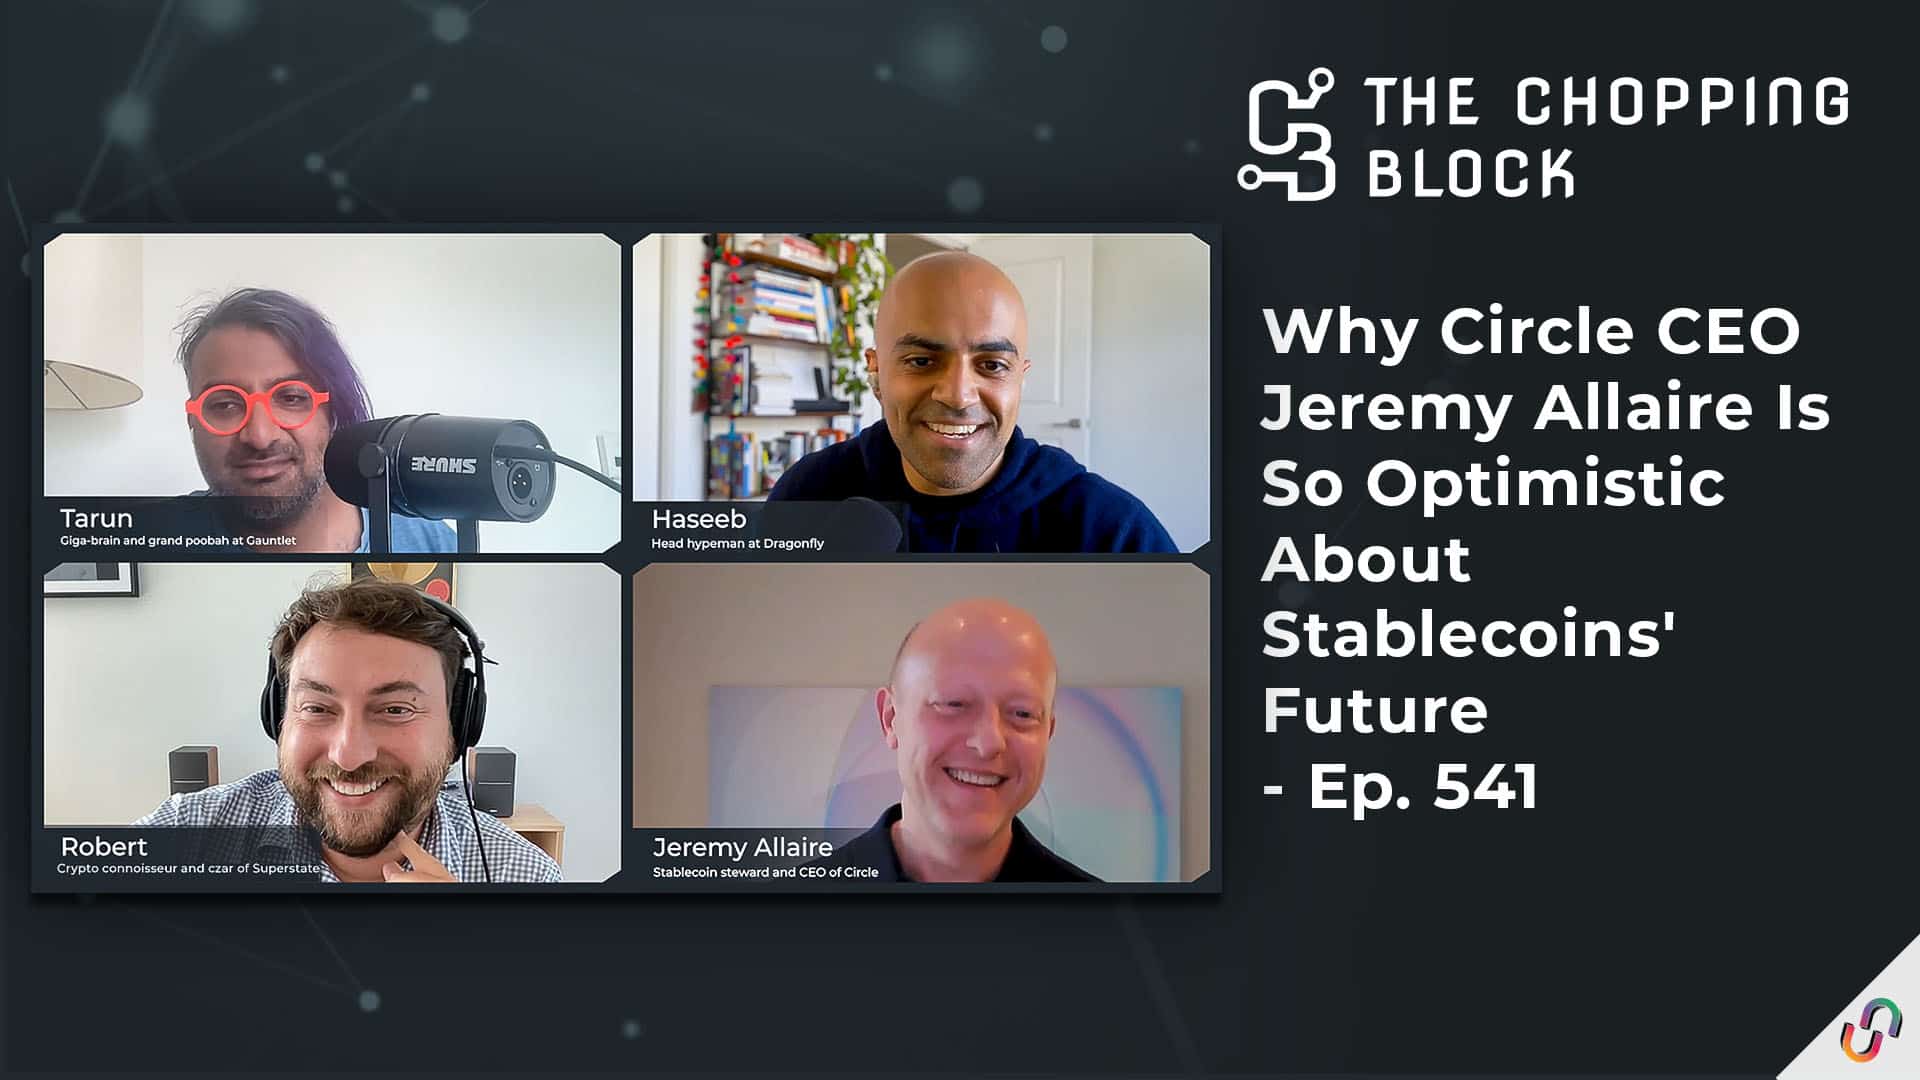 The Chopping Block: Why Circle CEO Jeremy Allaire Is So Optimistic About Stablecoins' Future - Ep. 541